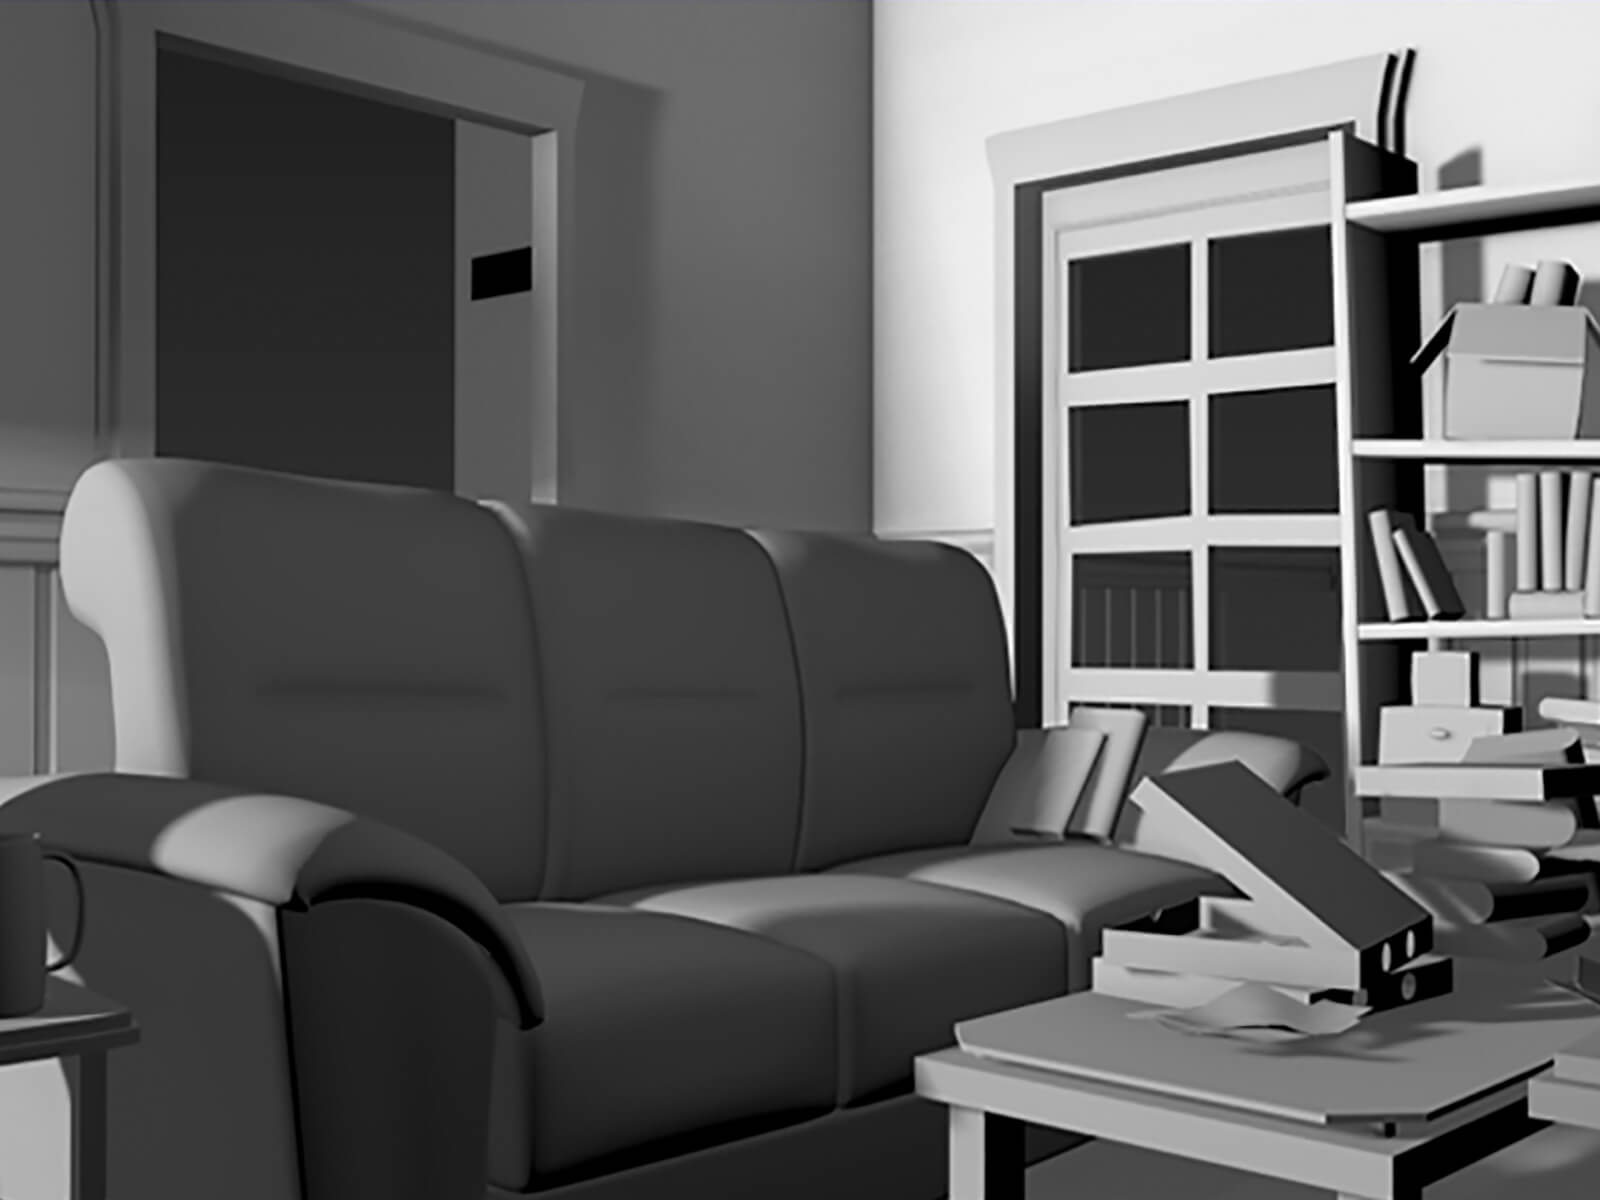 A colorless 3D-modeled living room with a couch in front of a small coffee table with a pizza box and books piled on top.